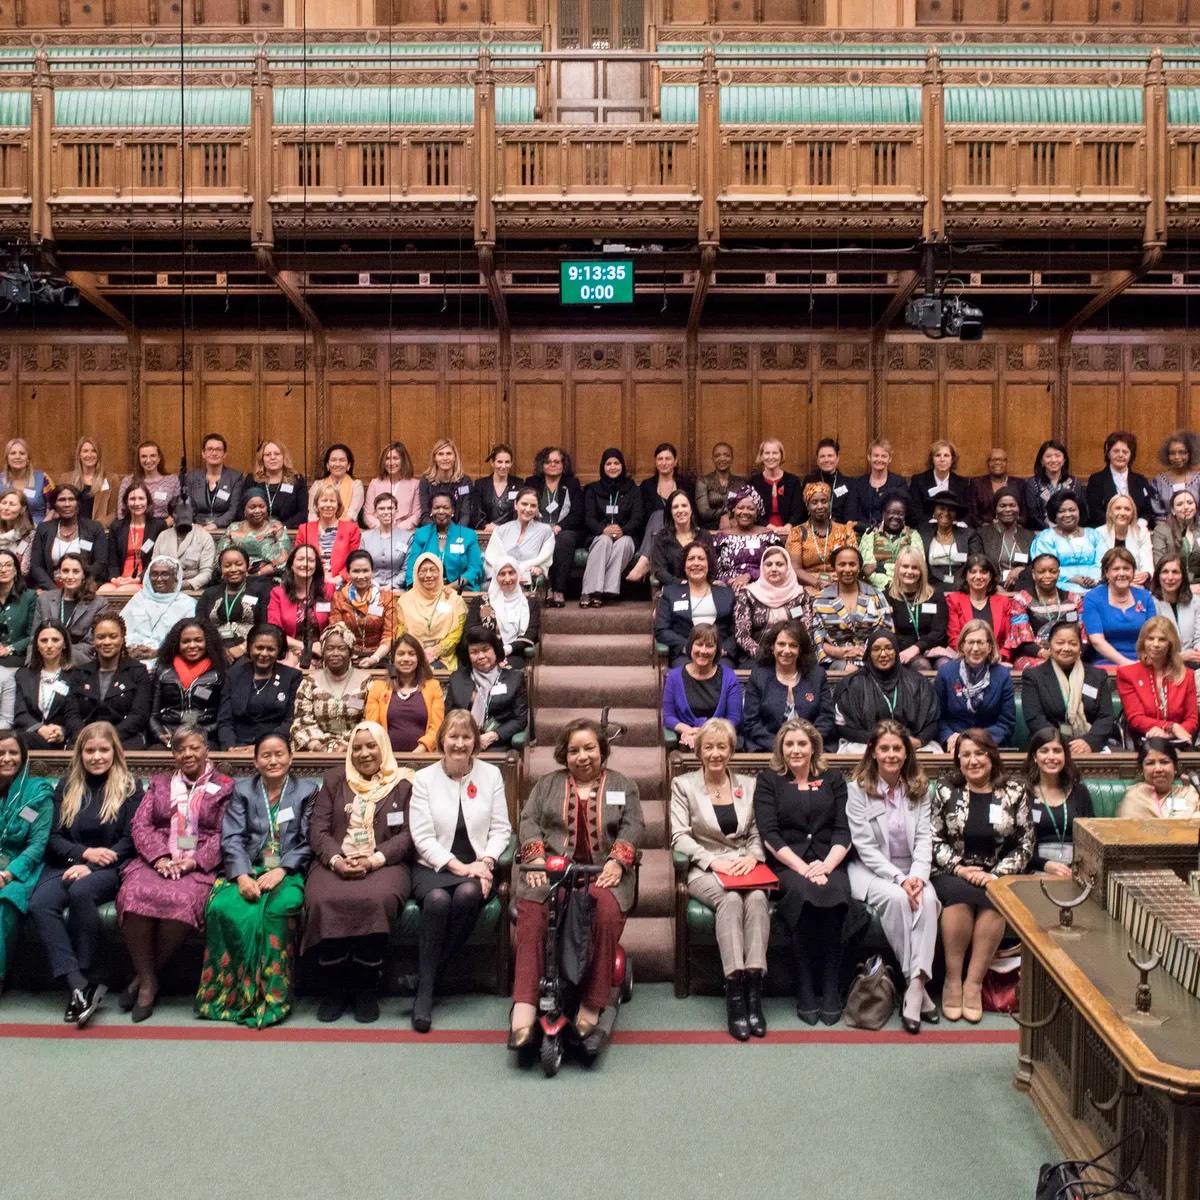 Women MPs from around the World in the House of Commons Chamber in Westminster